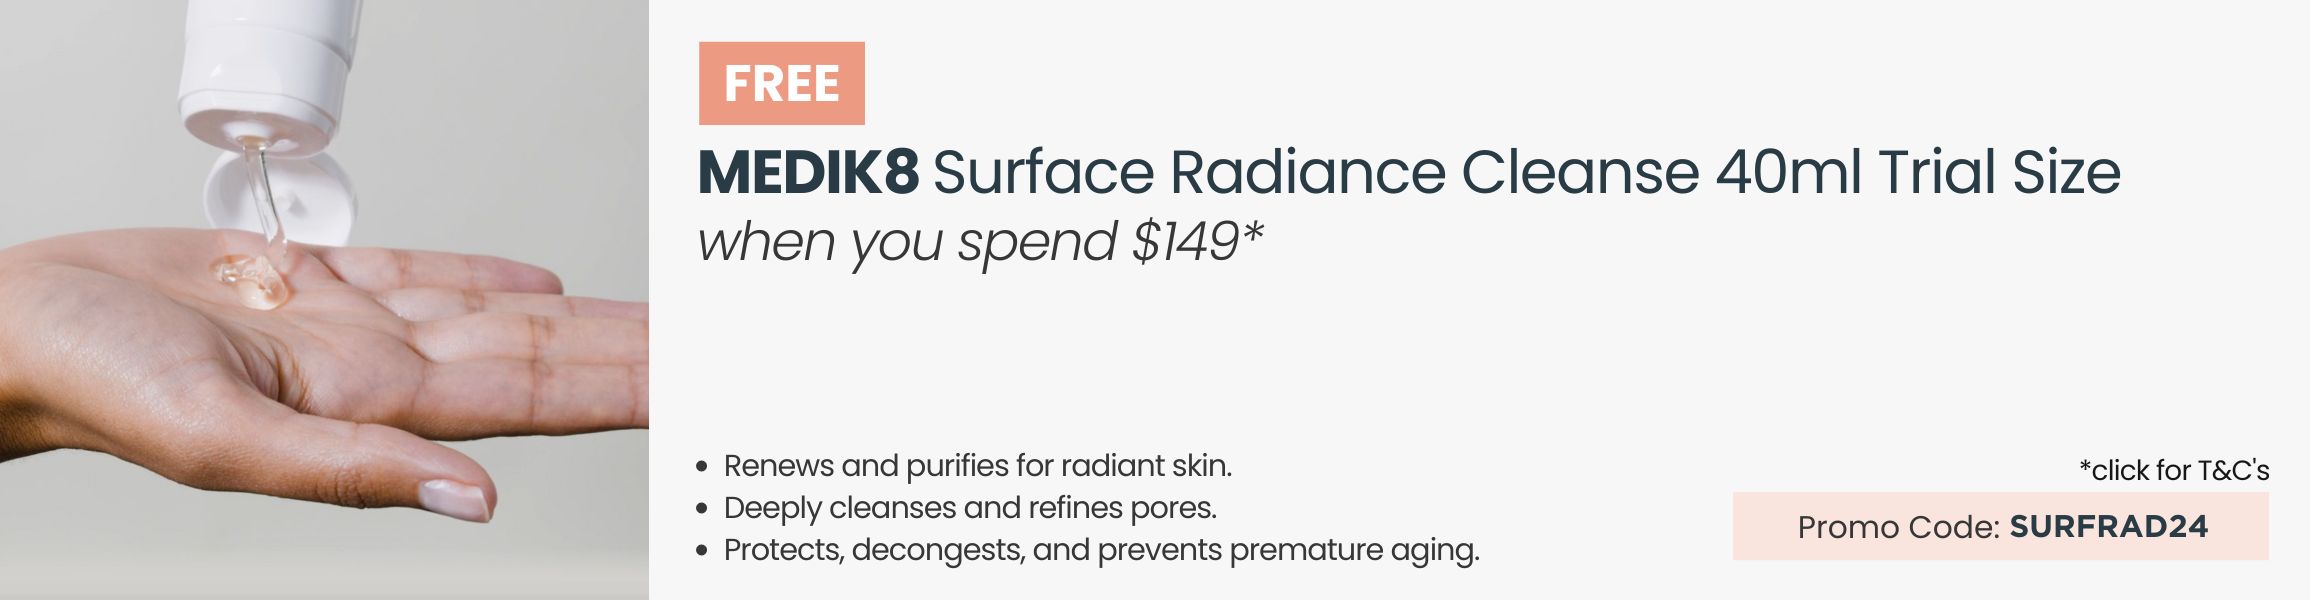 FREE Medik8 Surface Radiance Cleanse 40ml Trial Size. Min spend $149. Promo Code SURFRAD24